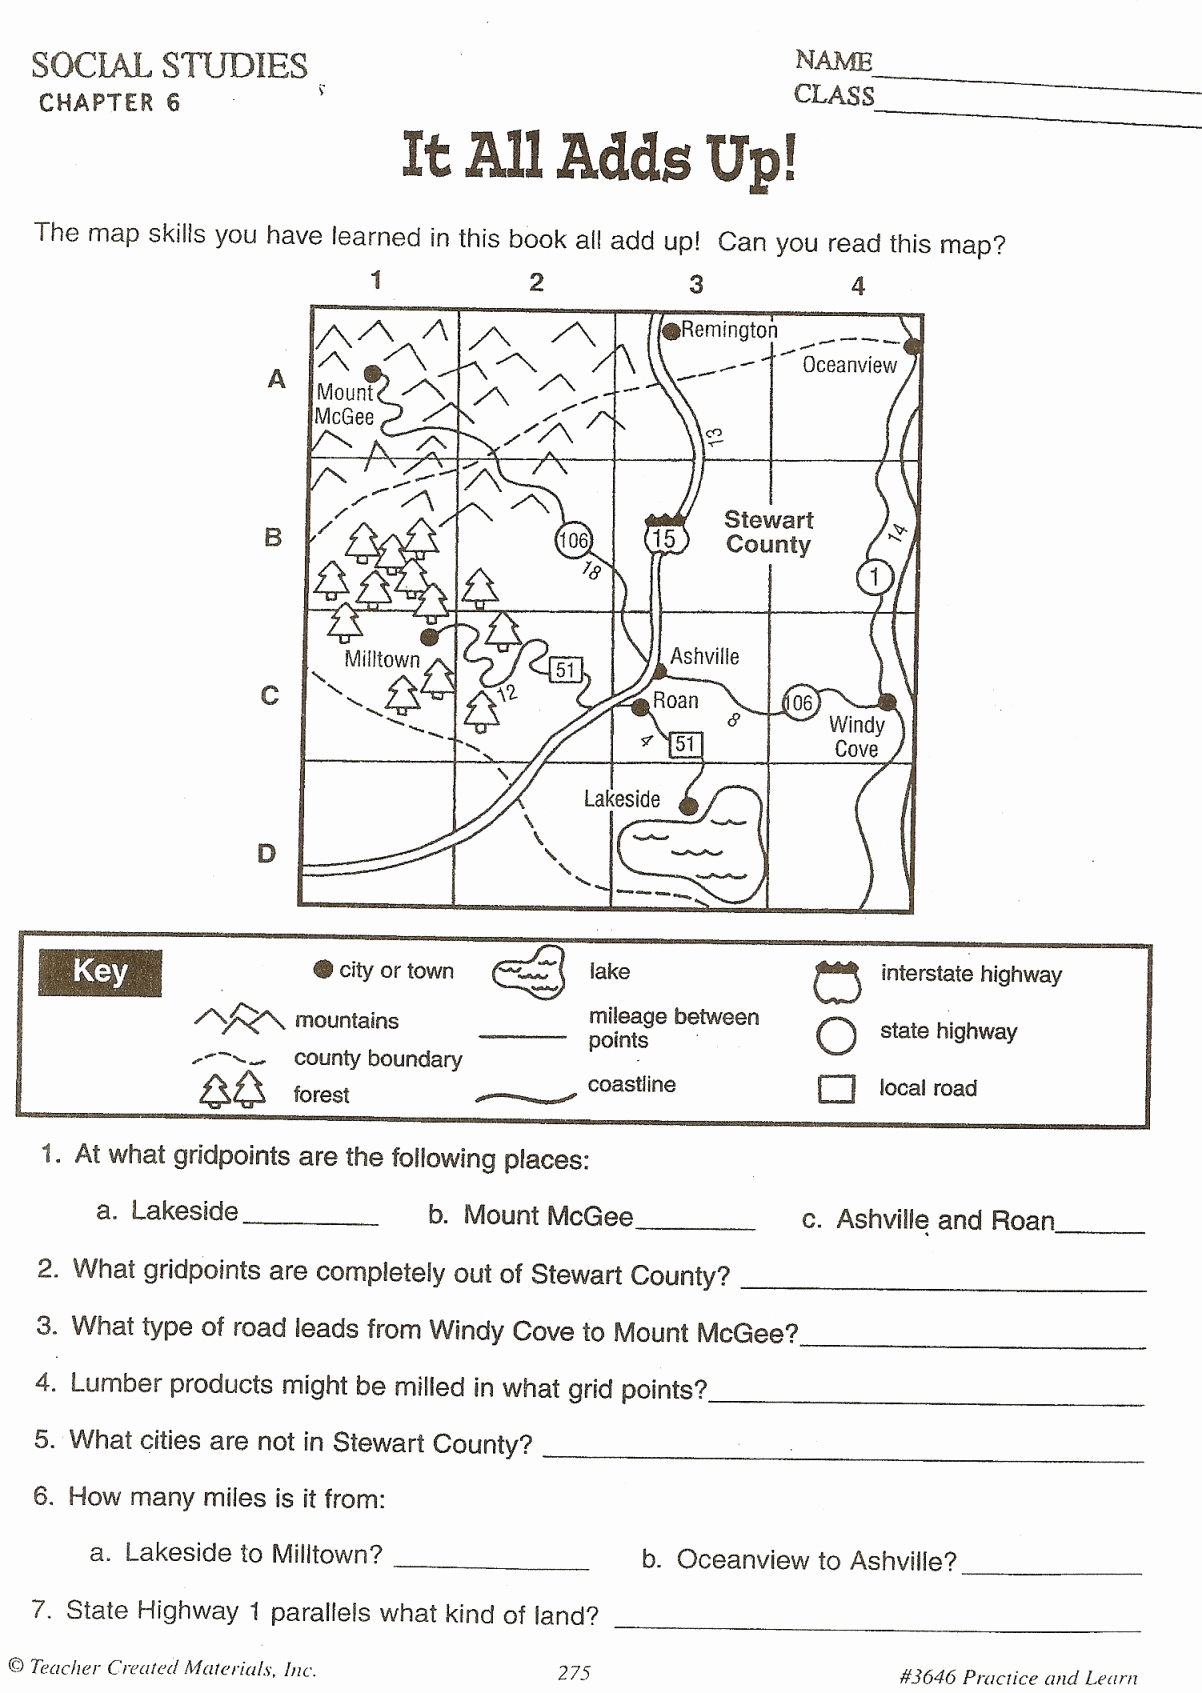 5th Grade Geography Worksheets Luxury 20 5th Grade Geography Worksheets